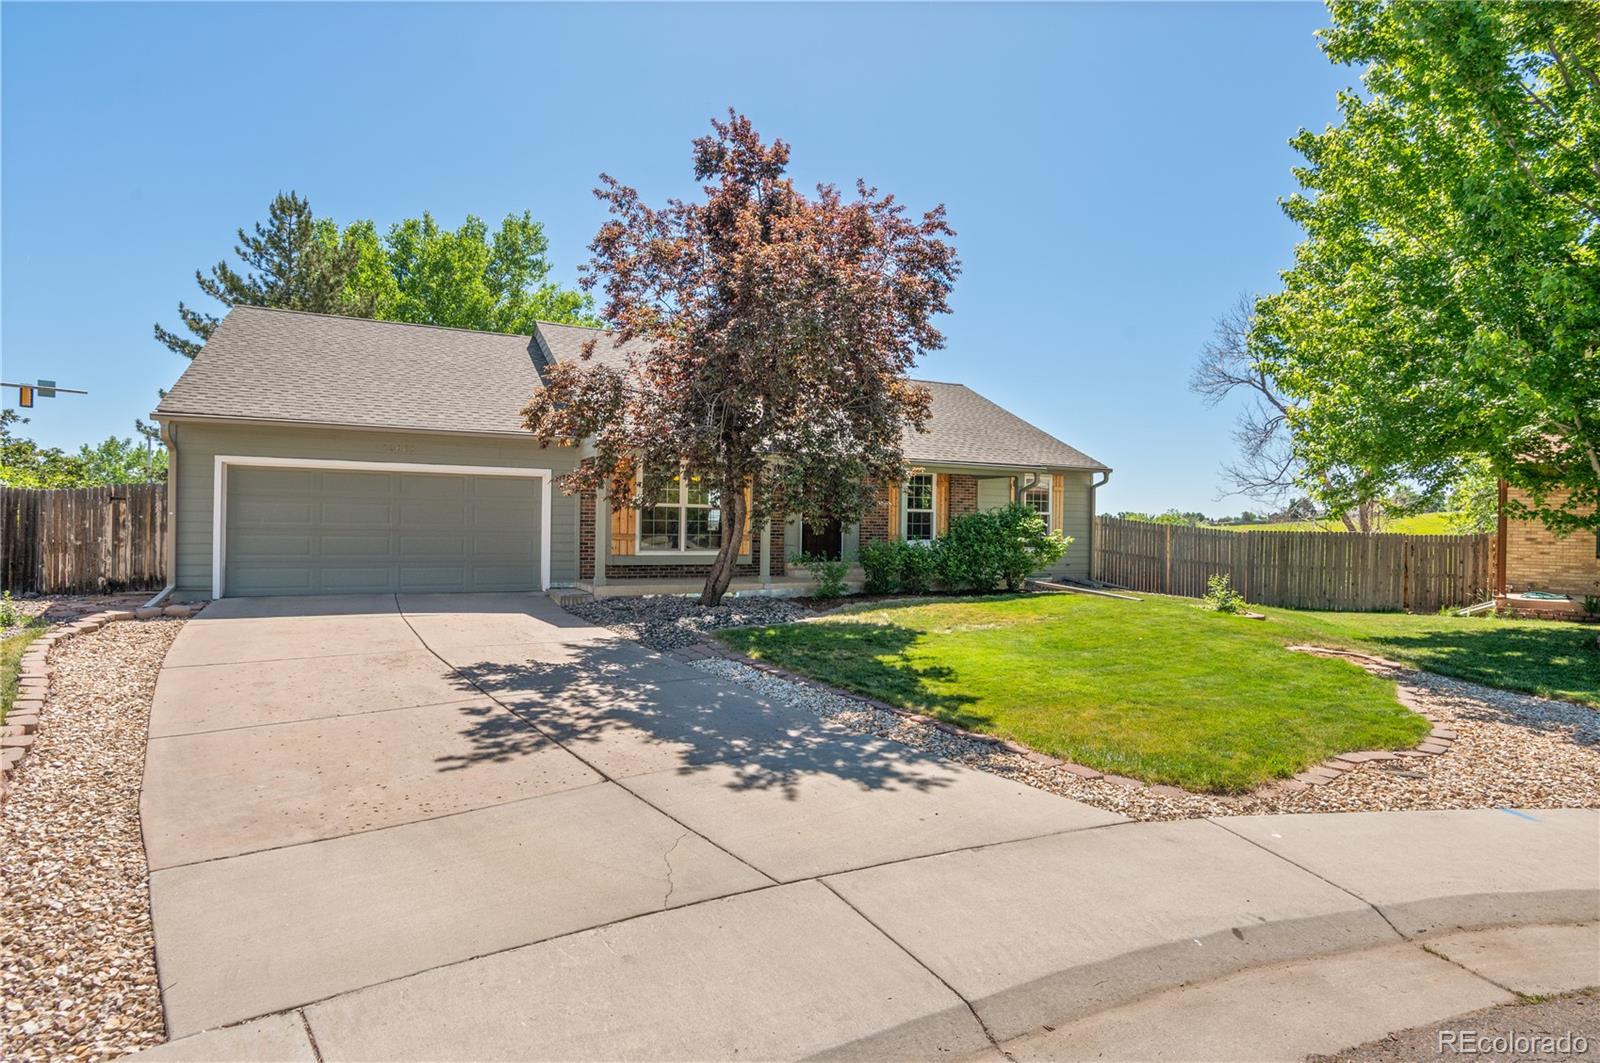 Report Image for 10003 W Geddes Place,Littleton, Colorado